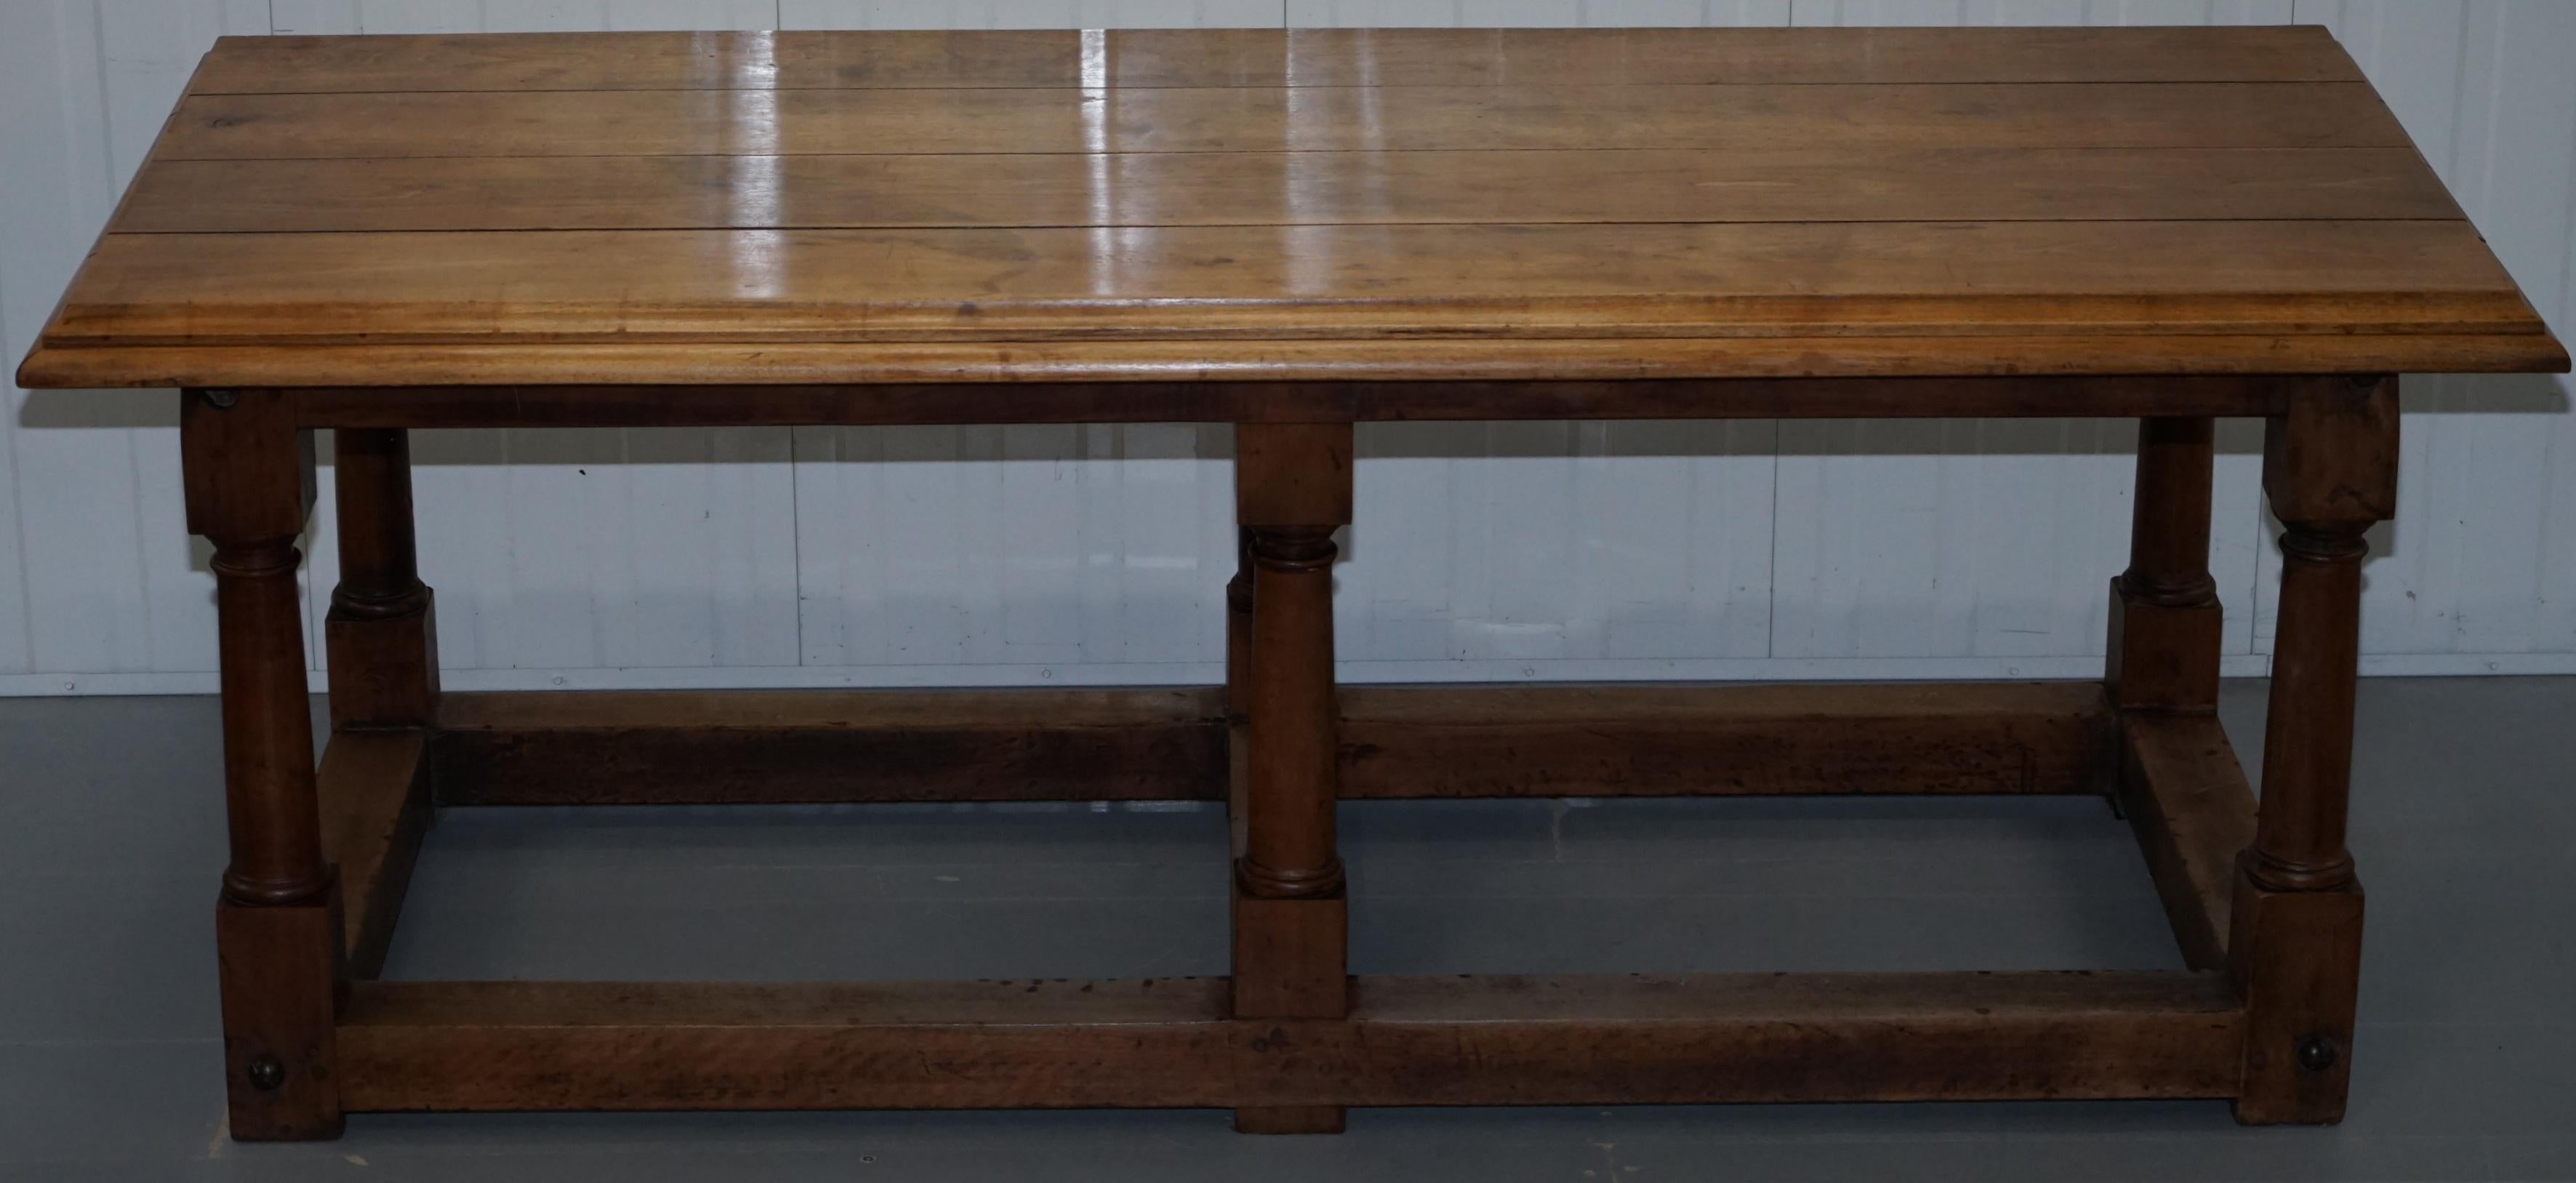 Hand-Carved 17th Century Style French Victorian Walnut Planked Top Refectory Dining Table